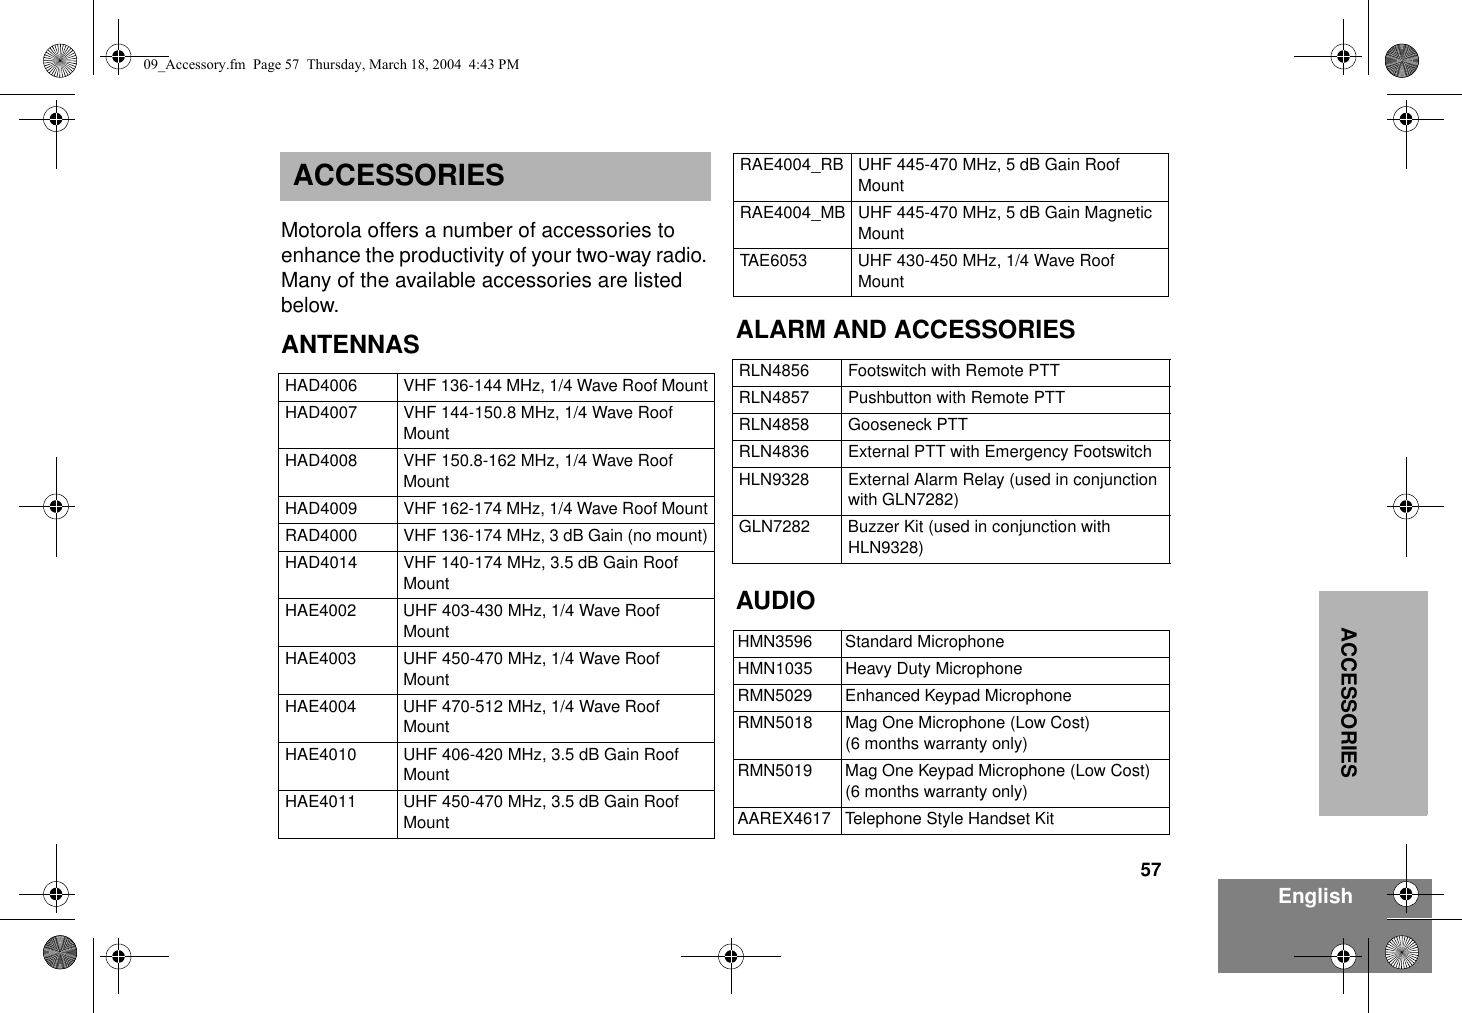 57EnglishACCESSORIESACCESSORIESMotorola offers a number of accessories to enhance the productivity of your two-way radio. Many of the available accessories are listed below.ANTENNAS ALARM AND ACCESSORIESAUDIOHAD4006 VHF 136-144 MHz, 1/4 Wave Roof MountHAD4007 VHF 144-150.8 MHz, 1/4 Wave Roof MountHAD4008 VHF 150.8-162 MHz, 1/4 Wave Roof MountHAD4009 VHF 162-174 MHz, 1/4 Wave Roof MountRAD4000 VHF 136-174 MHz, 3 dB Gain (no mount)HAD4014 VHF 140-174 MHz, 3.5 dB Gain Roof MountHAE4002 UHF 403-430 MHz, 1/4 Wave Roof MountHAE4003 UHF 450-470 MHz, 1/4 Wave Roof MountHAE4004 UHF 470-512 MHz, 1/4 Wave Roof MountHAE4010 UHF 406-420 MHz, 3.5 dB Gain Roof MountHAE4011 UHF 450-470 MHz, 3.5 dB Gain Roof MountRAE4004_RB UHF 445-470 MHz, 5 dB Gain Roof MountRAE4004_MB UHF 445-470 MHz, 5 dB Gain Magnetic MountTAE6053 UHF 430-450 MHz, 1/4 Wave Roof MountRLN4856 Footswitch with Remote PTTRLN4857 Pushbutton with Remote PTTRLN4858 Gooseneck PTTRLN4836 External PTT with Emergency FootswitchHLN9328 External Alarm Relay (used in conjunction with GLN7282)GLN7282 Buzzer Kit (used in conjunction with HLN9328)HMN3596 Standard MicrophoneHMN1035 Heavy Duty MicrophoneRMN5029 Enhanced Keypad MicrophoneRMN5018 Mag One Microphone (Low Cost)(6 months warranty only)RMN5019 Mag One Keypad Microphone (Low Cost)(6 months warranty only)AAREX4617 Telephone Style Handset Kit09_Accessory.fm  Page 57  Thursday, March 18, 2004  4:43 PM